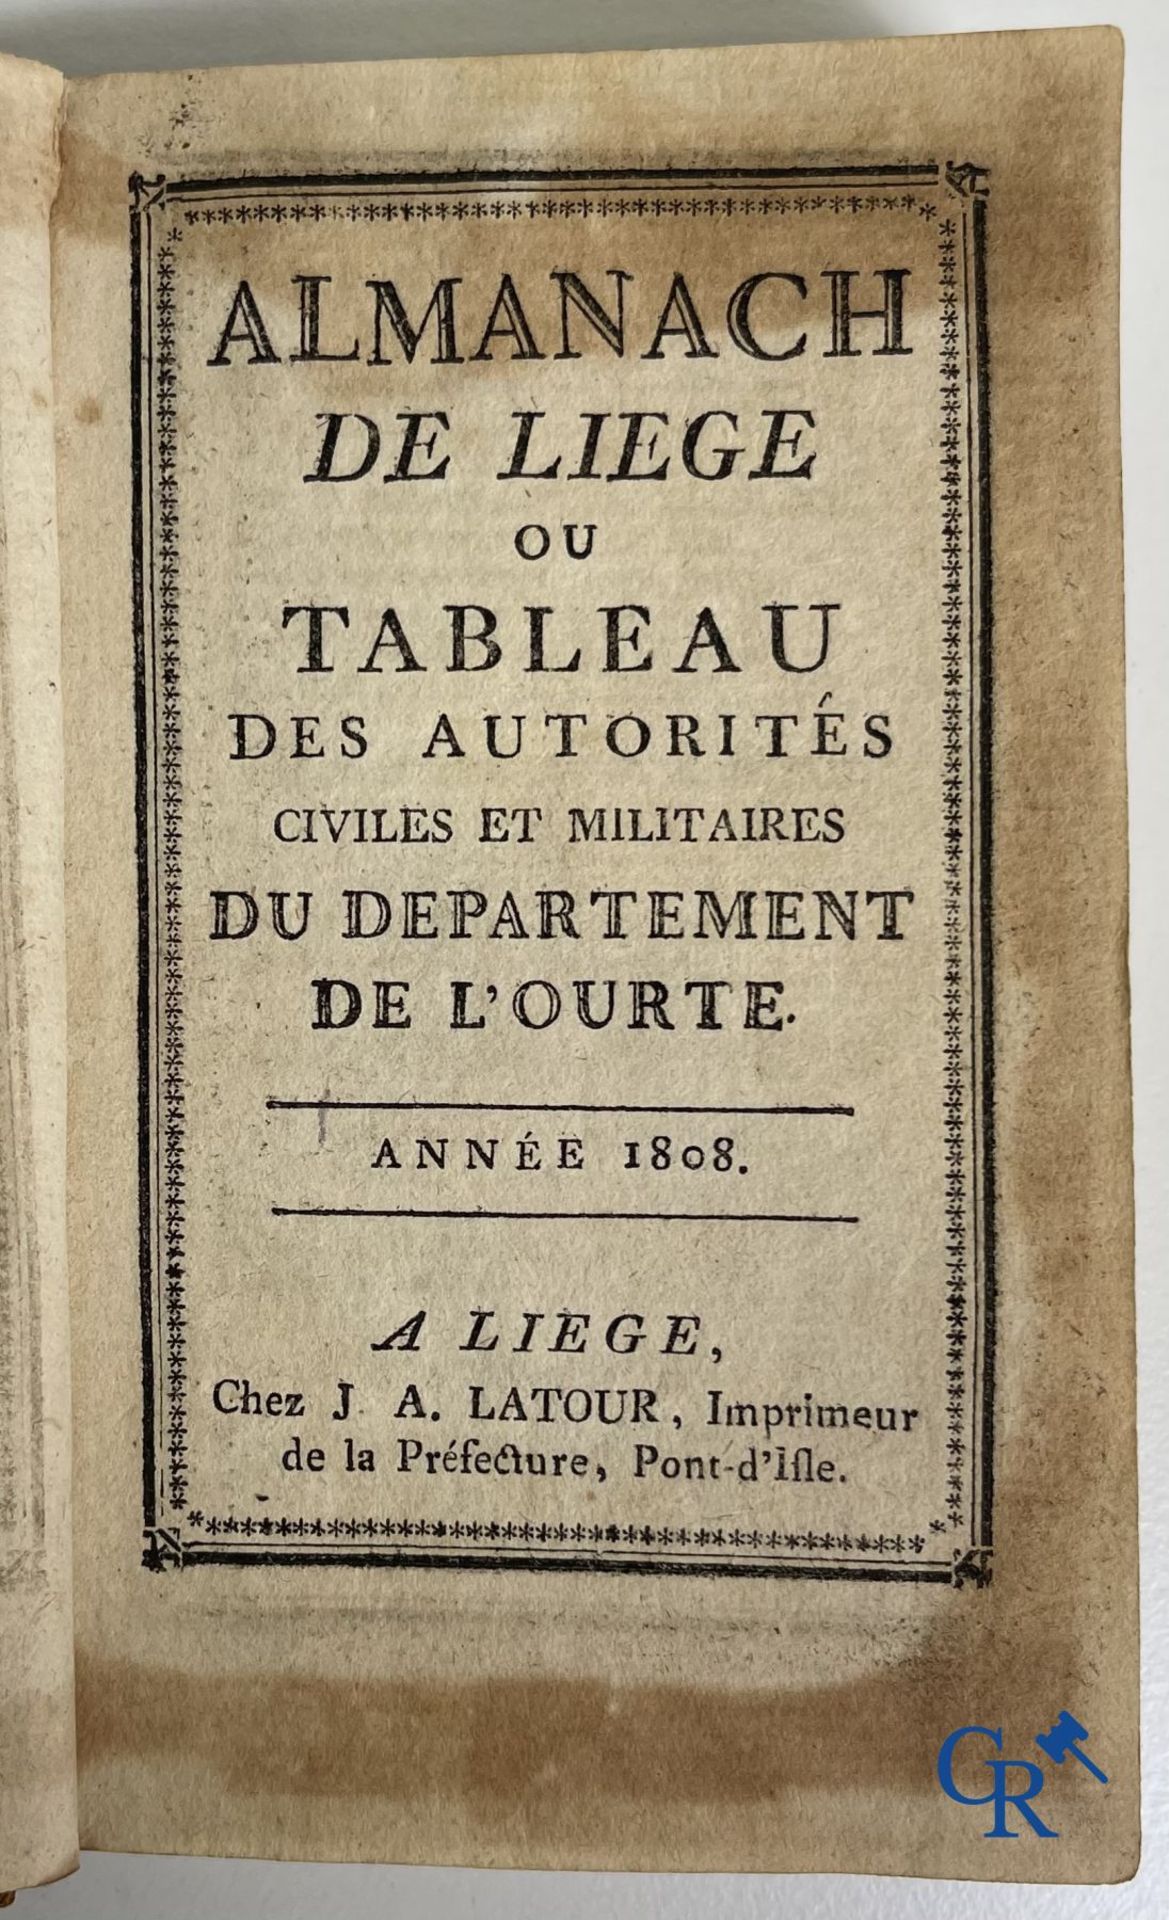 Early printed books: 5 interesting books with various themes. 17th-18th century. - Bild 6 aus 11